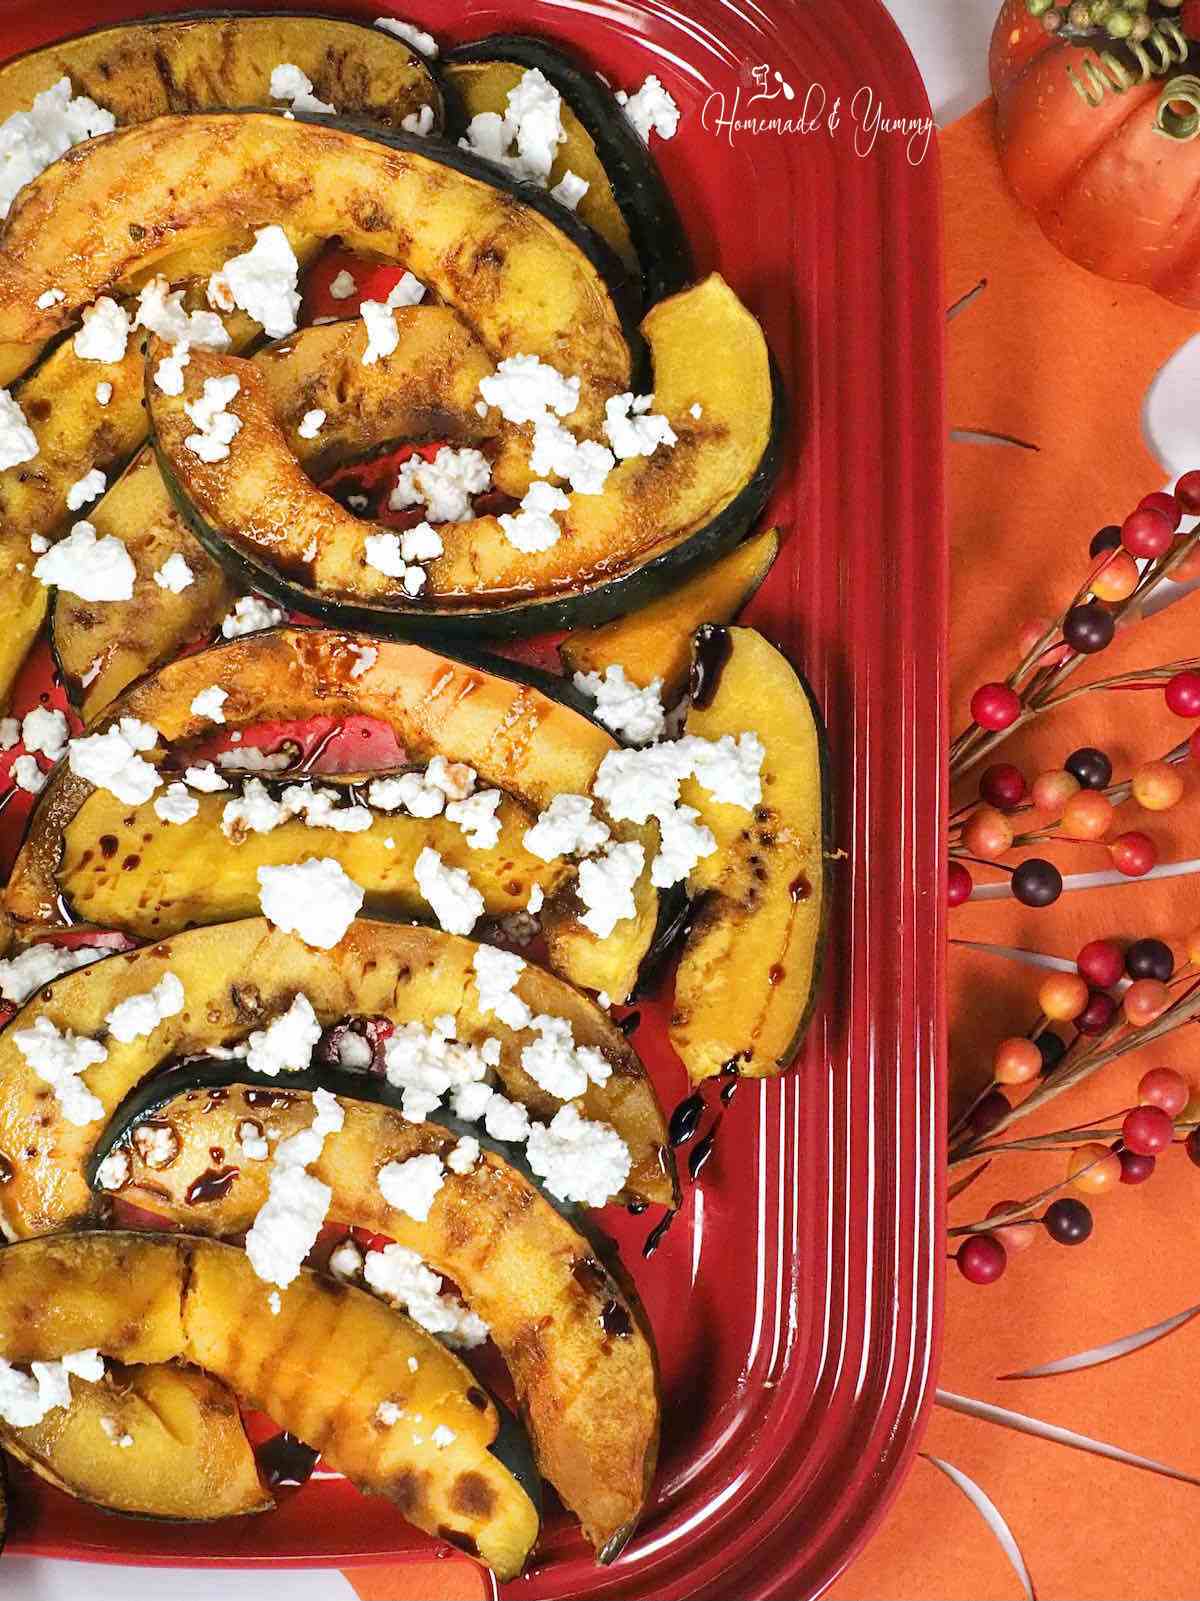 Roasted squash slices with balsamic and feta cheese.